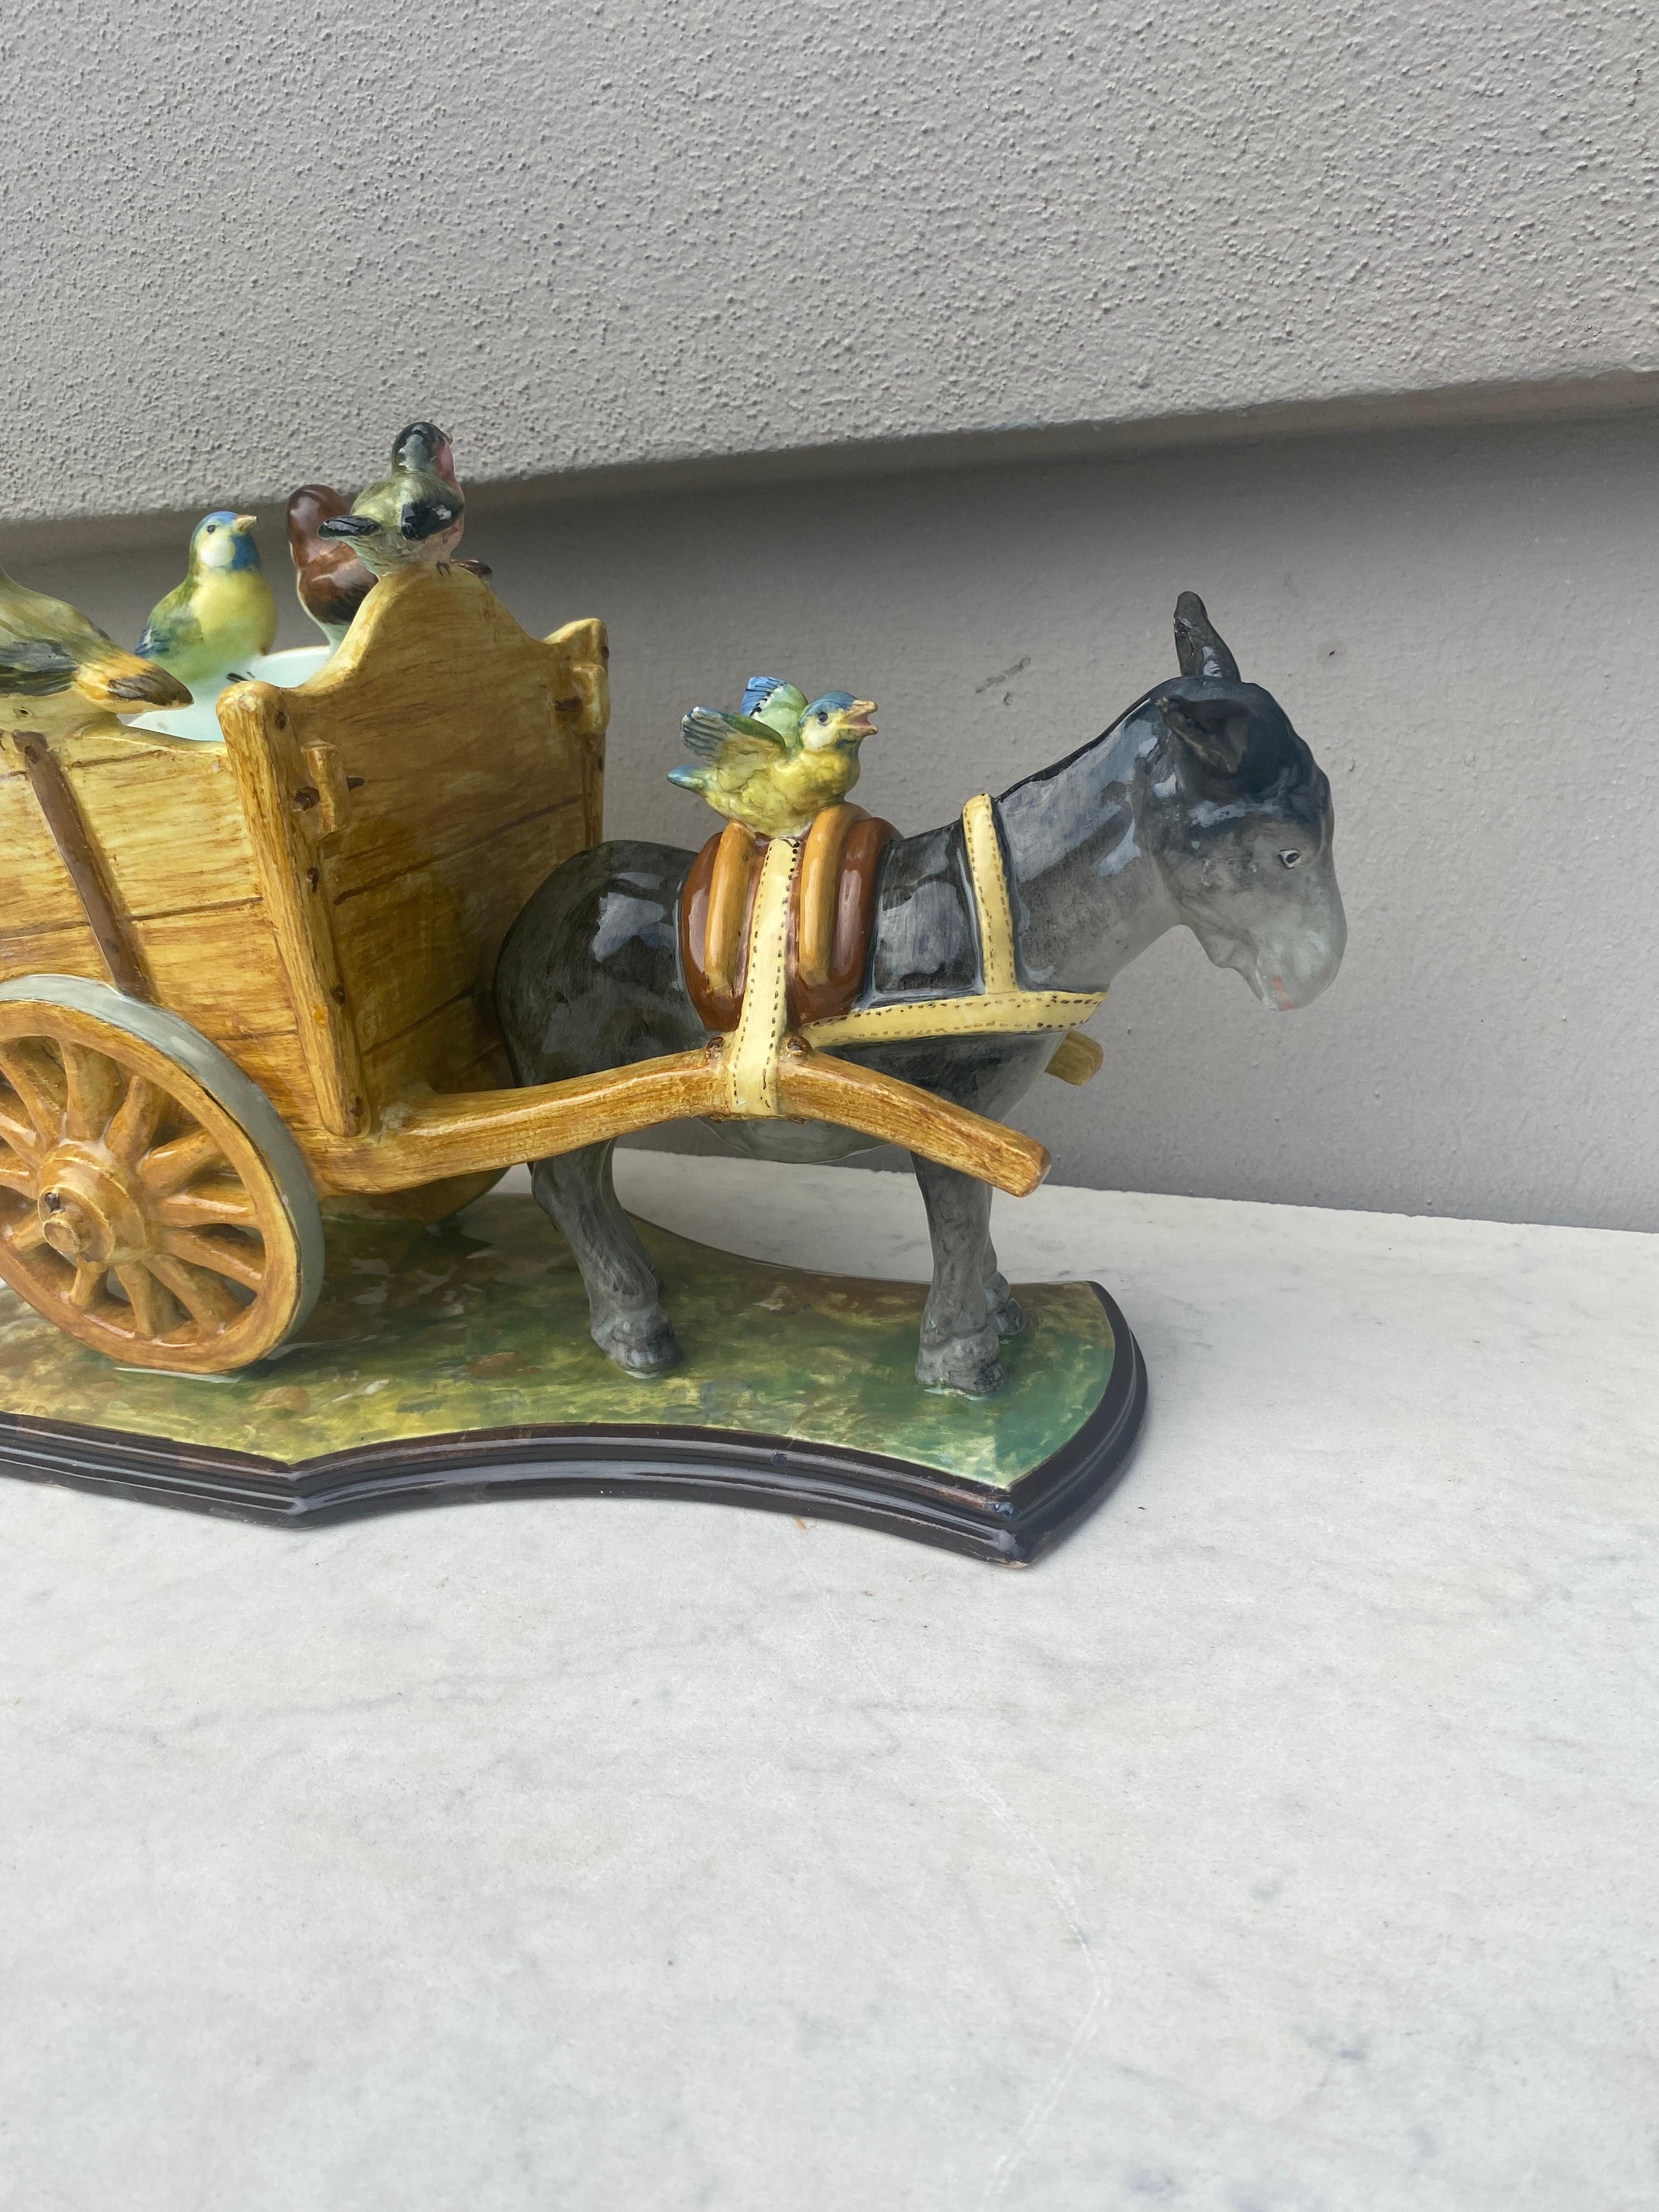 Large French Majolica cart with donkey & birds signed Delphin Massier.
The Massier are known for the quality of their unique enamels and paintings.
The Massier family produced different pieces with birds in a very creative style in Vallauris on